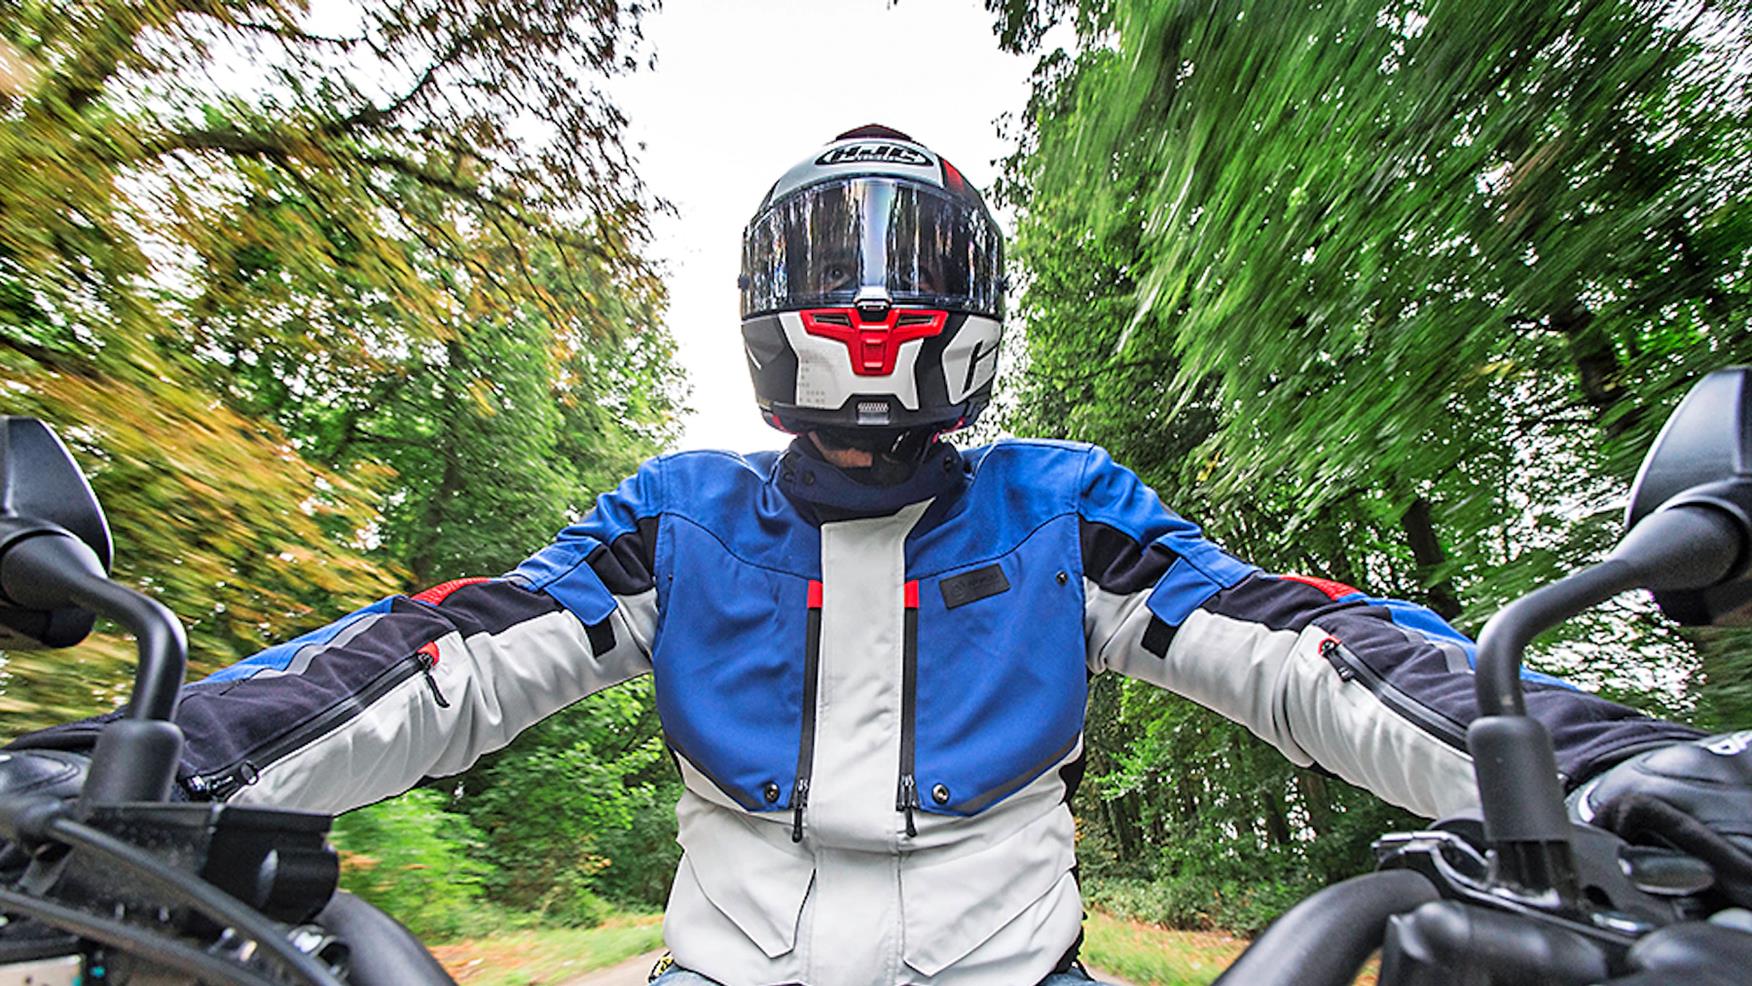 The Best Textile Motorcycle Jackets MCN